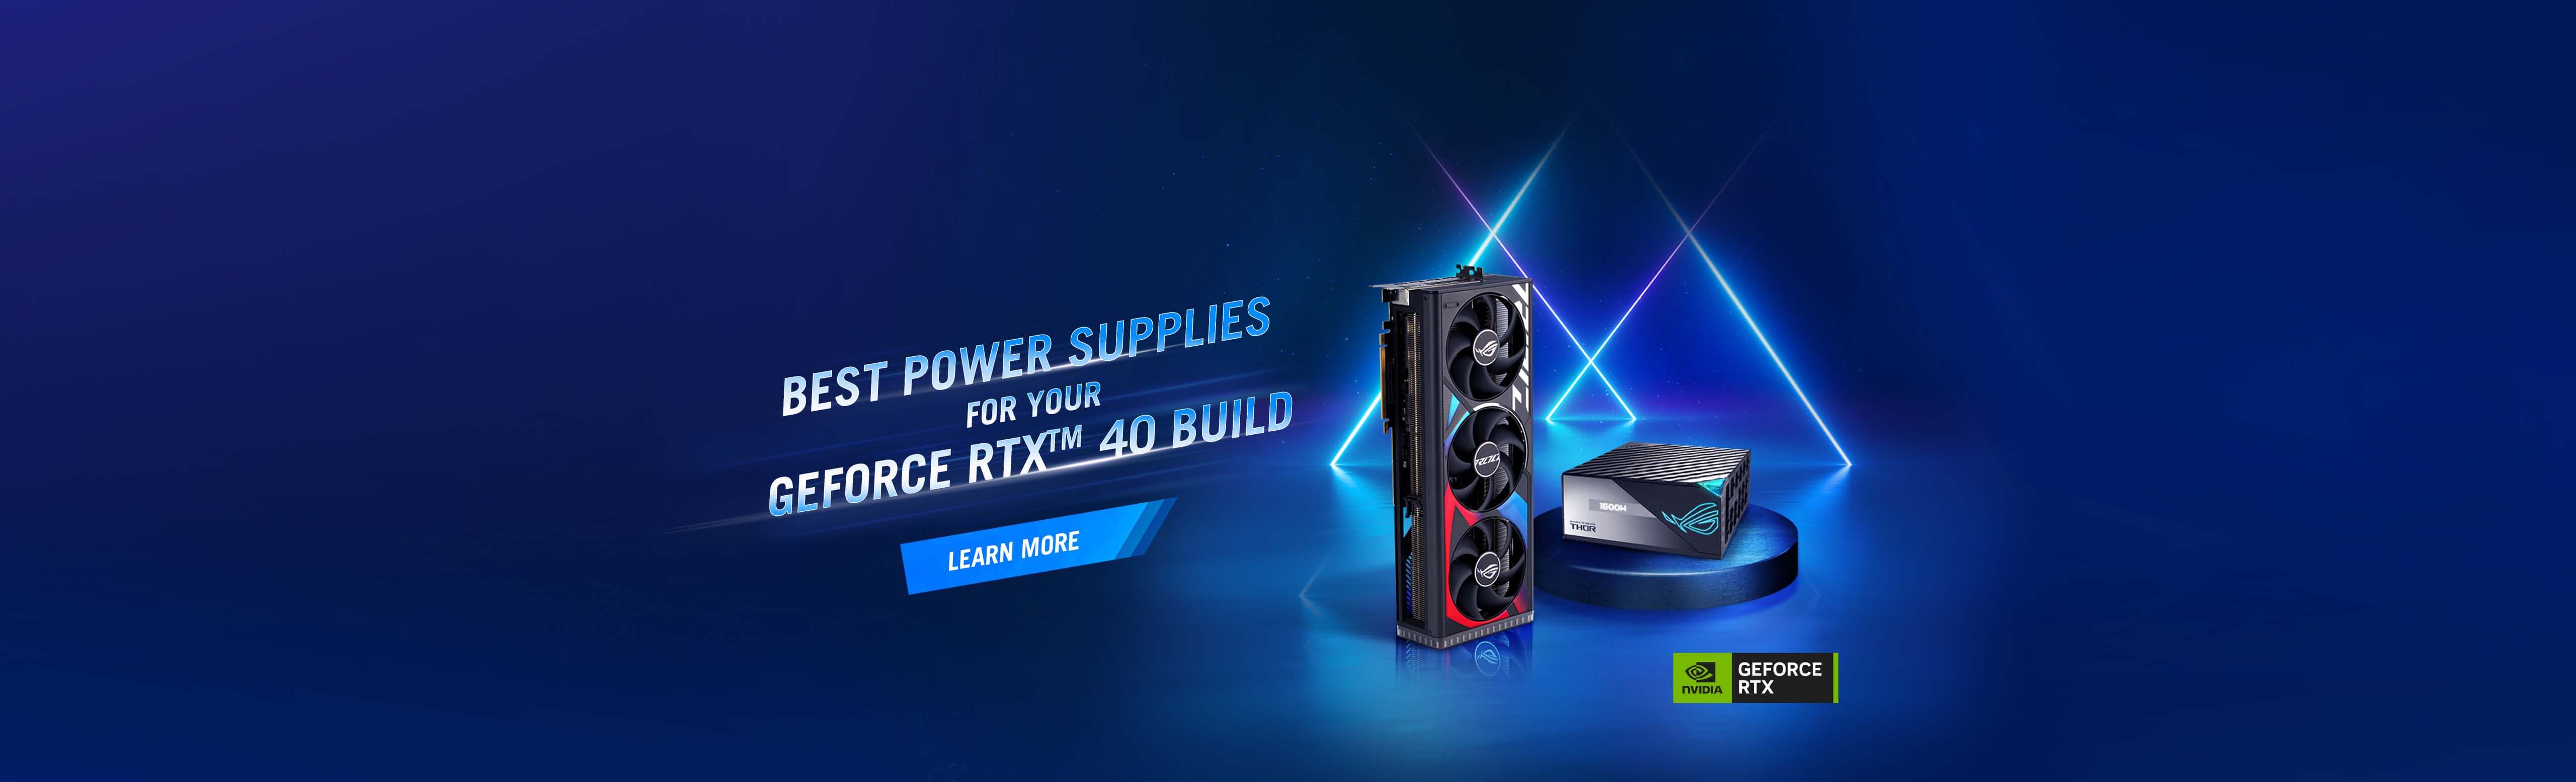 Best Power Supplies for your GEFORCE RTX™ 40 BUILD